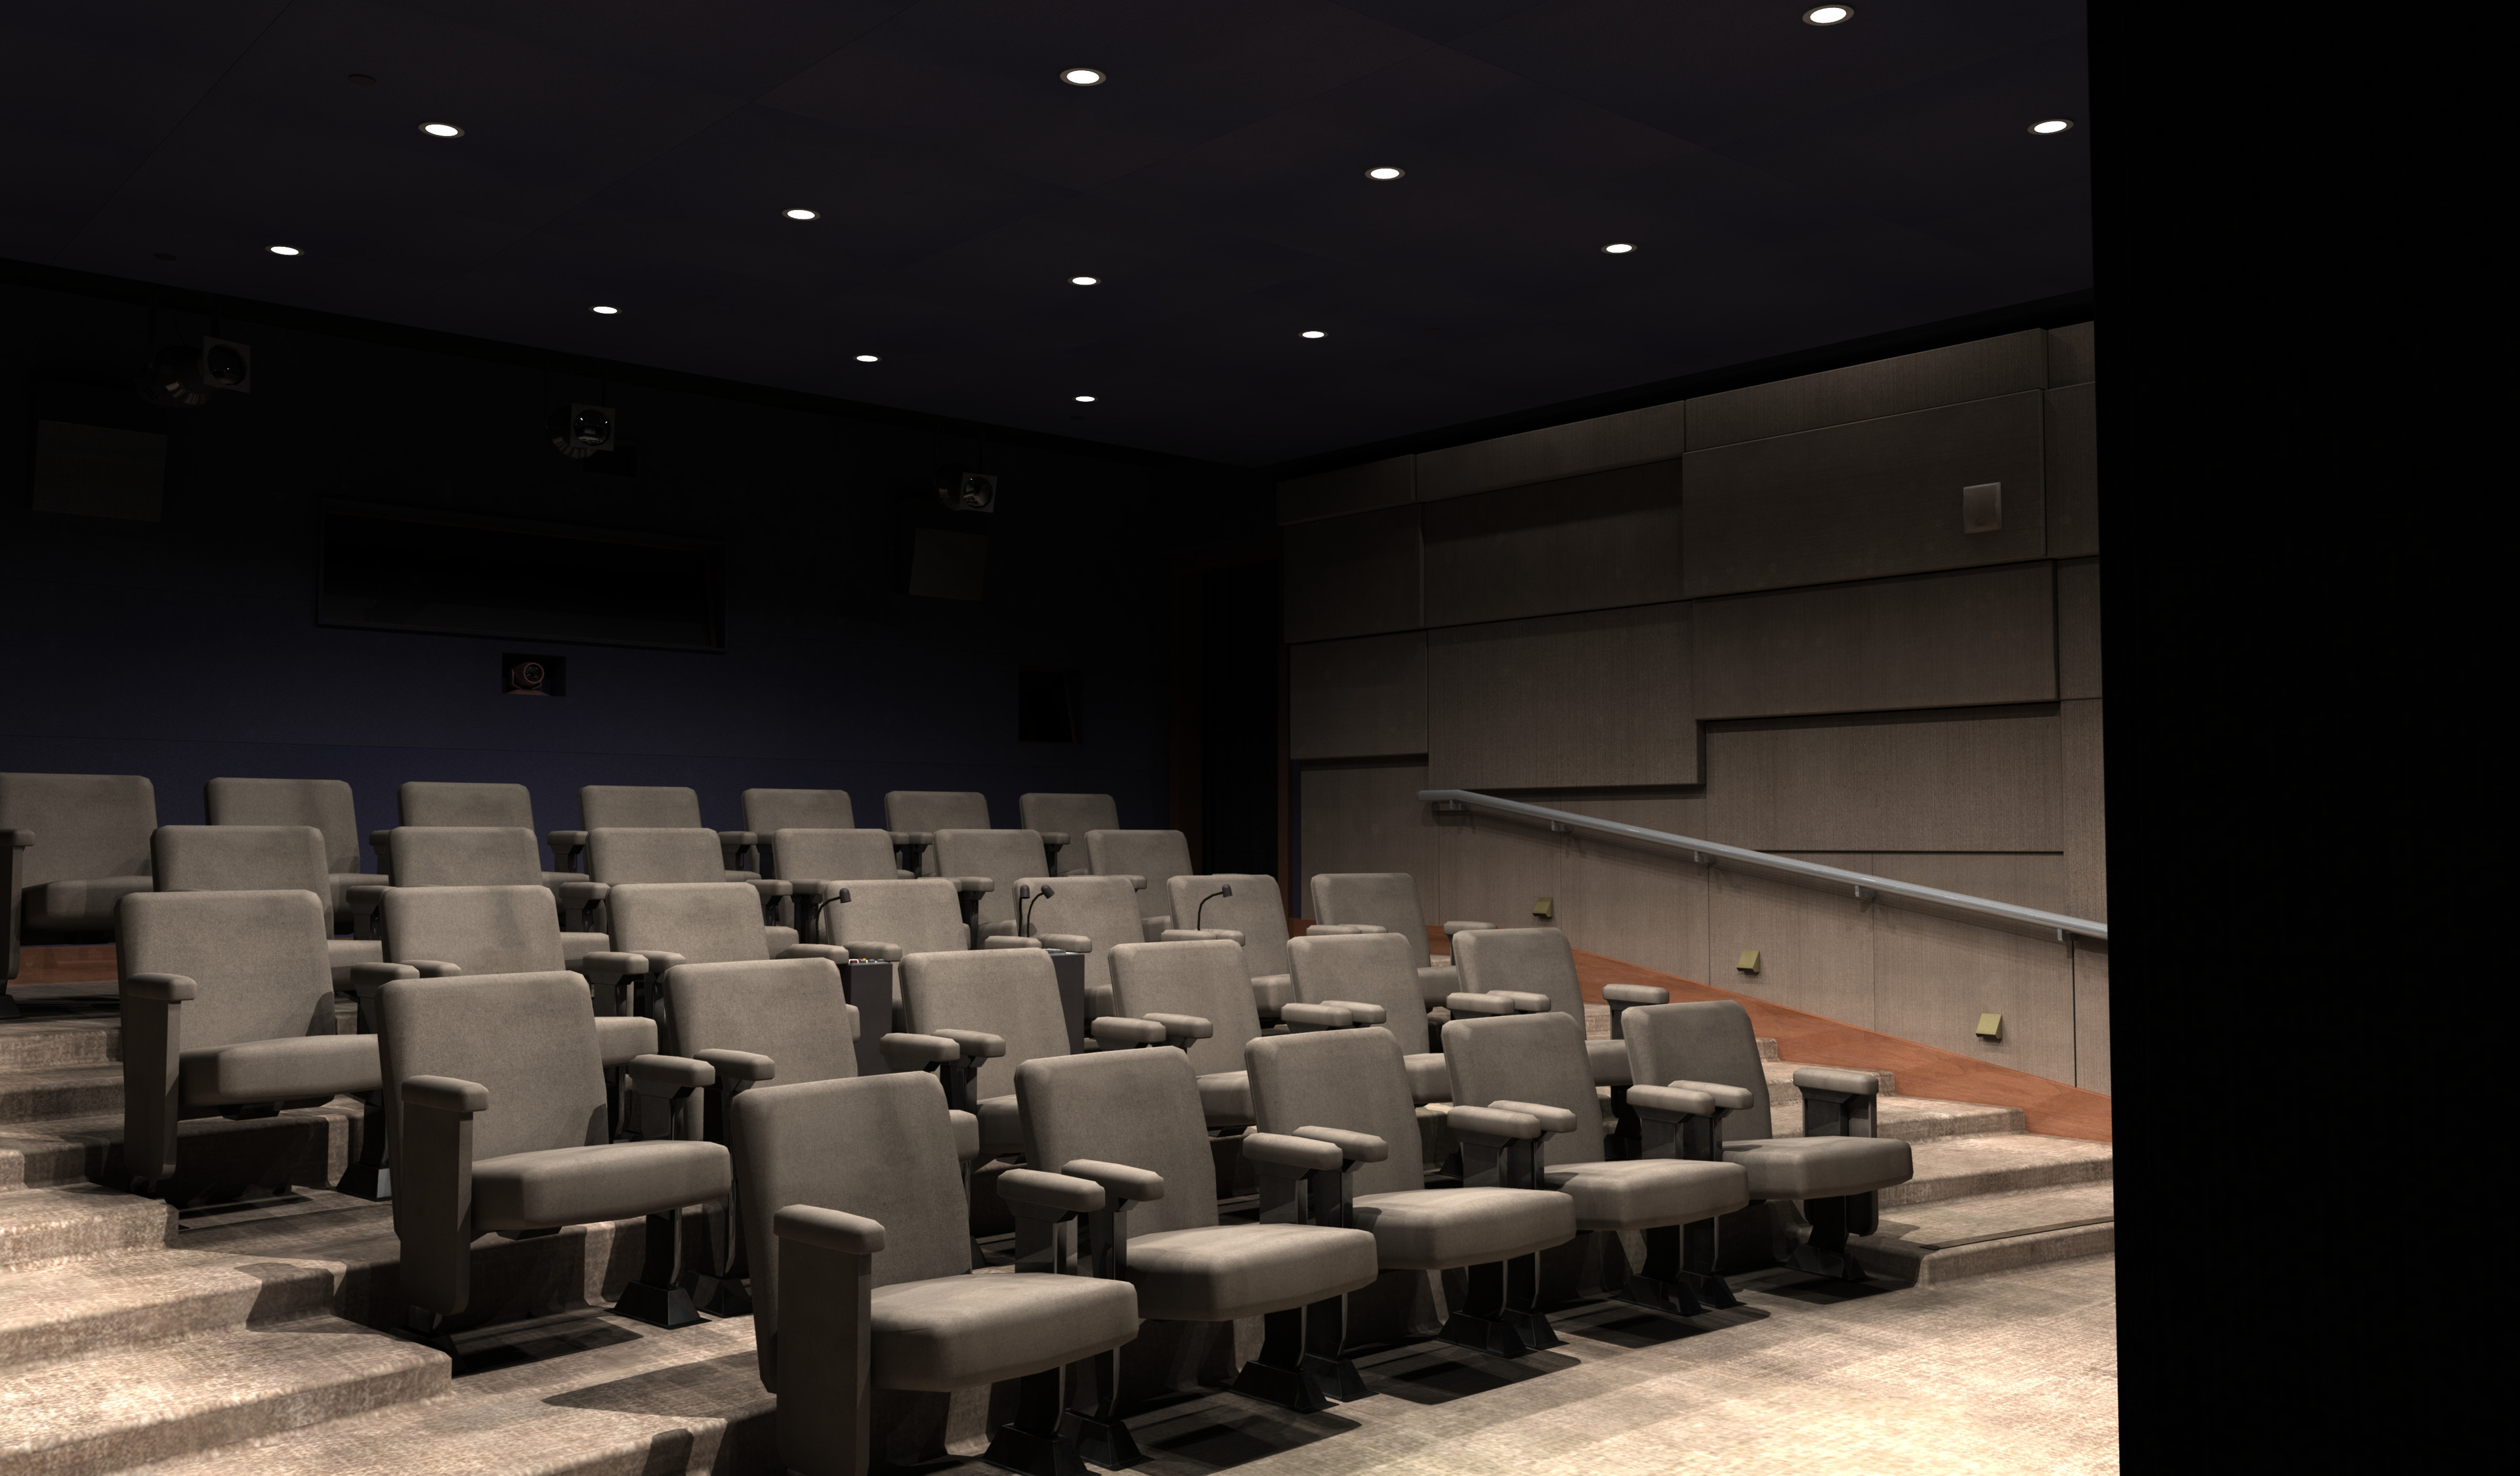 3D Screening Room | Theater
(Lighting Condition with no film playing)